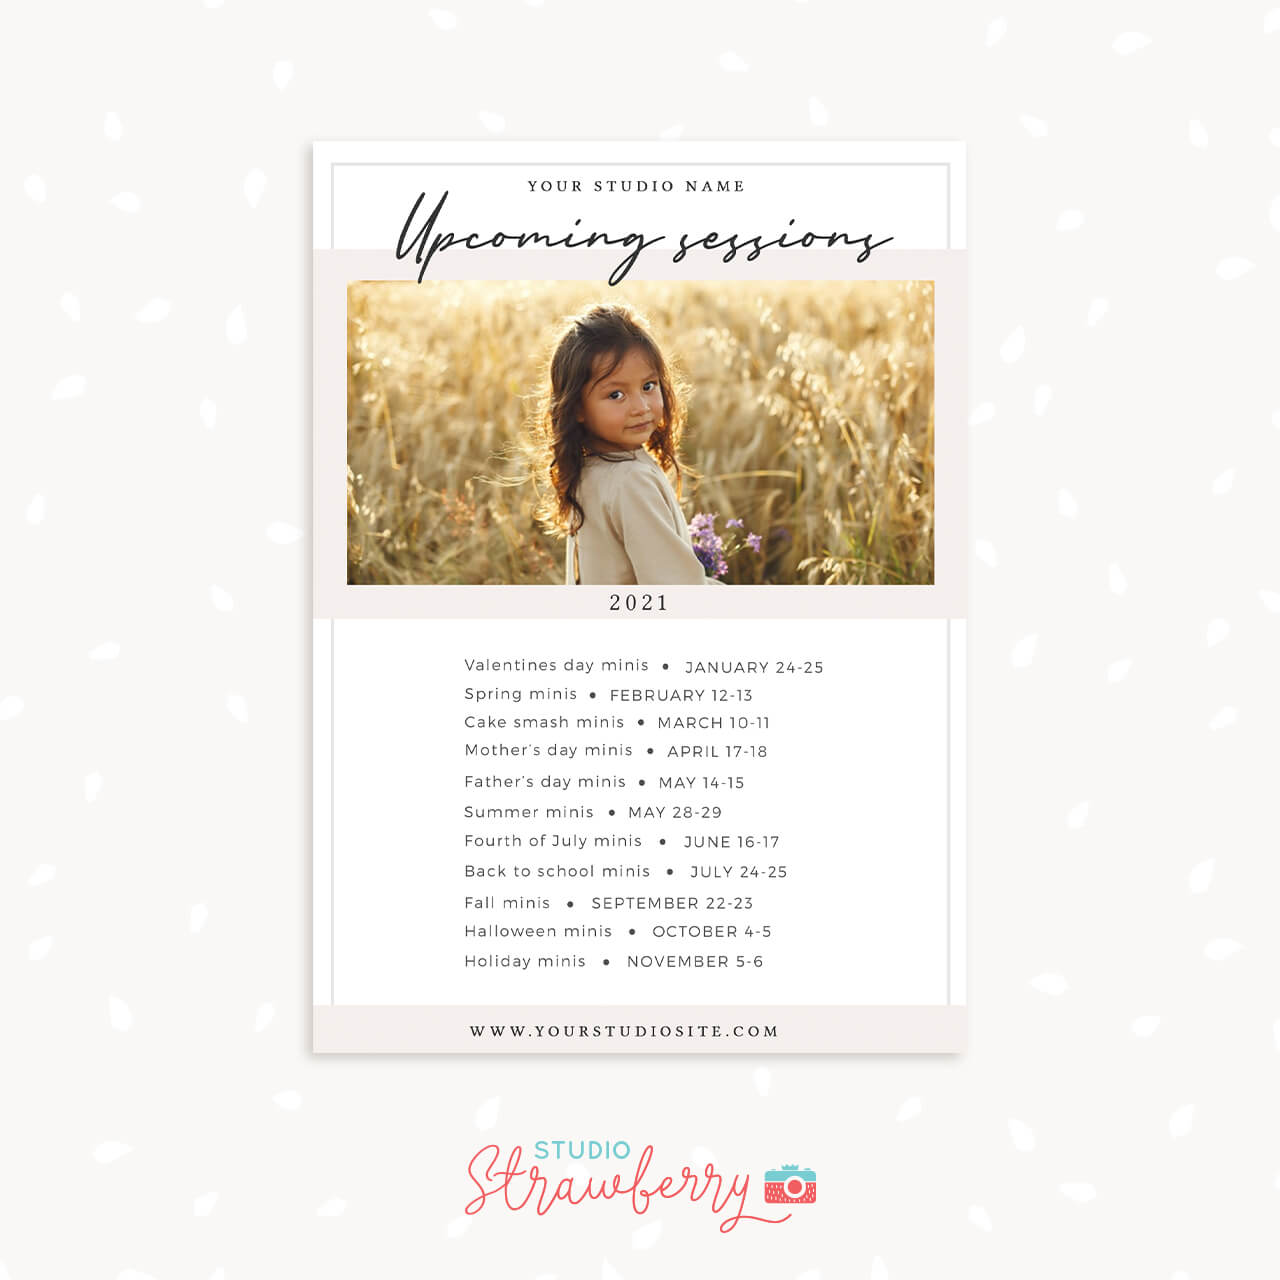 Upcoming sessions schedule photographer template